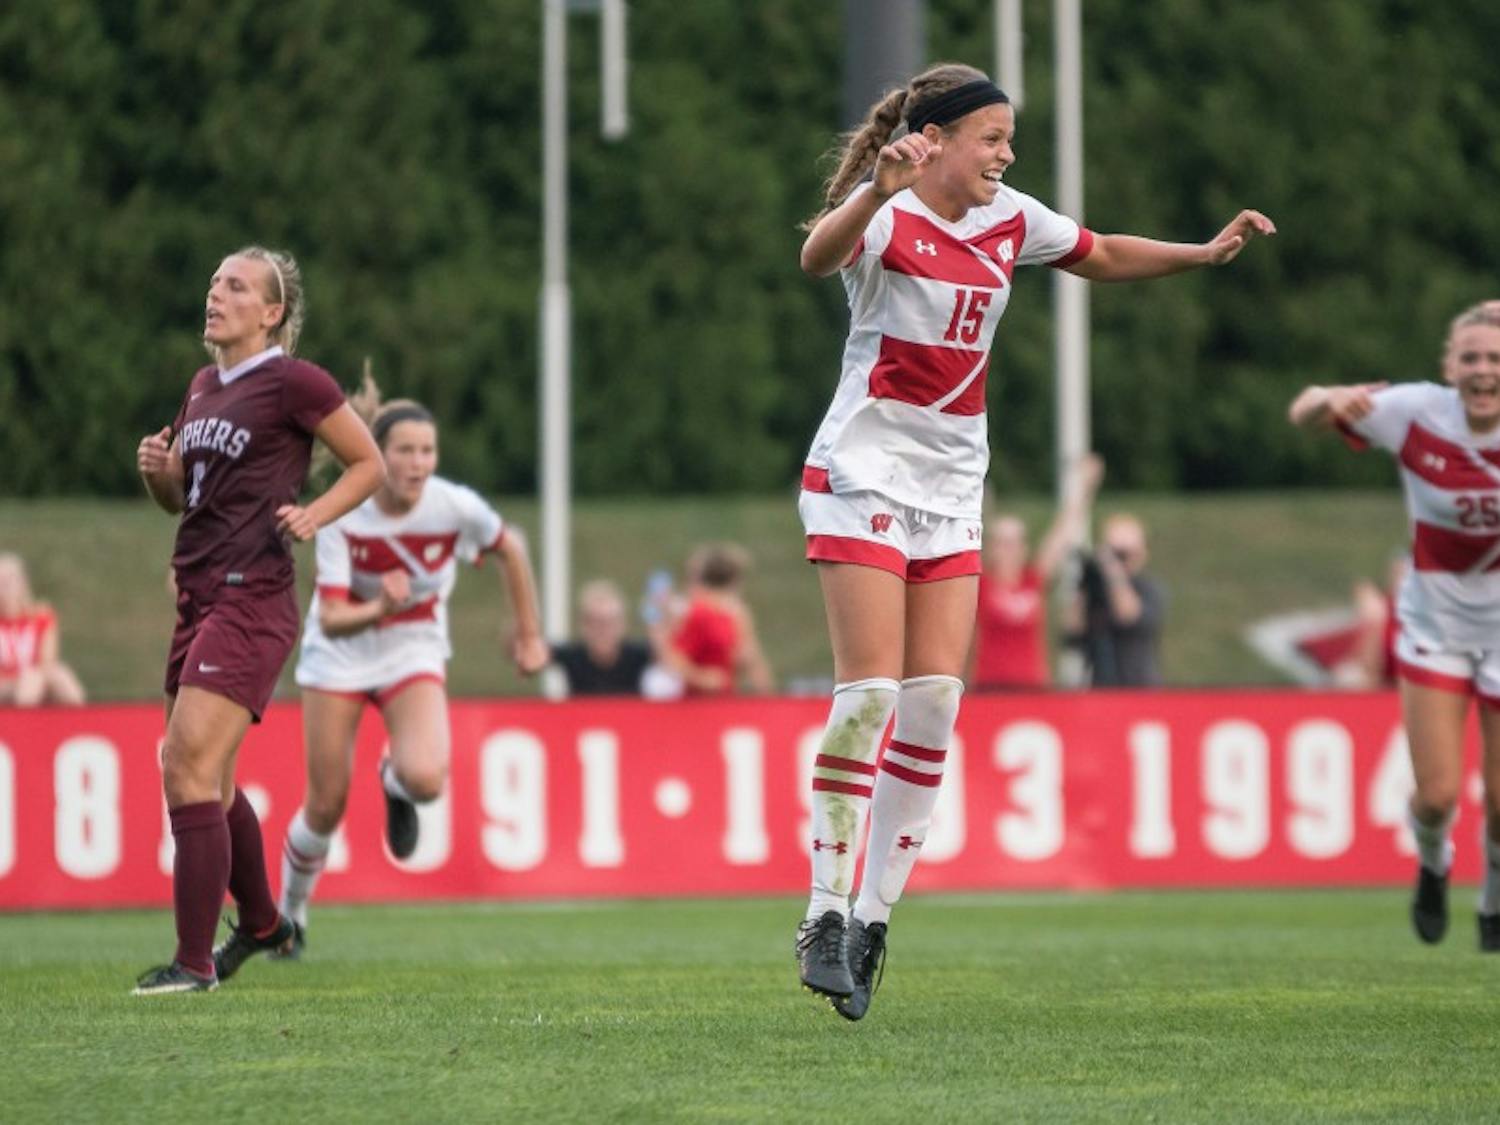 Senior forward Dani Rhodes scored Wisconsin's first goal Sunday night, in a dominant performance over in-state rivals Green Bay.